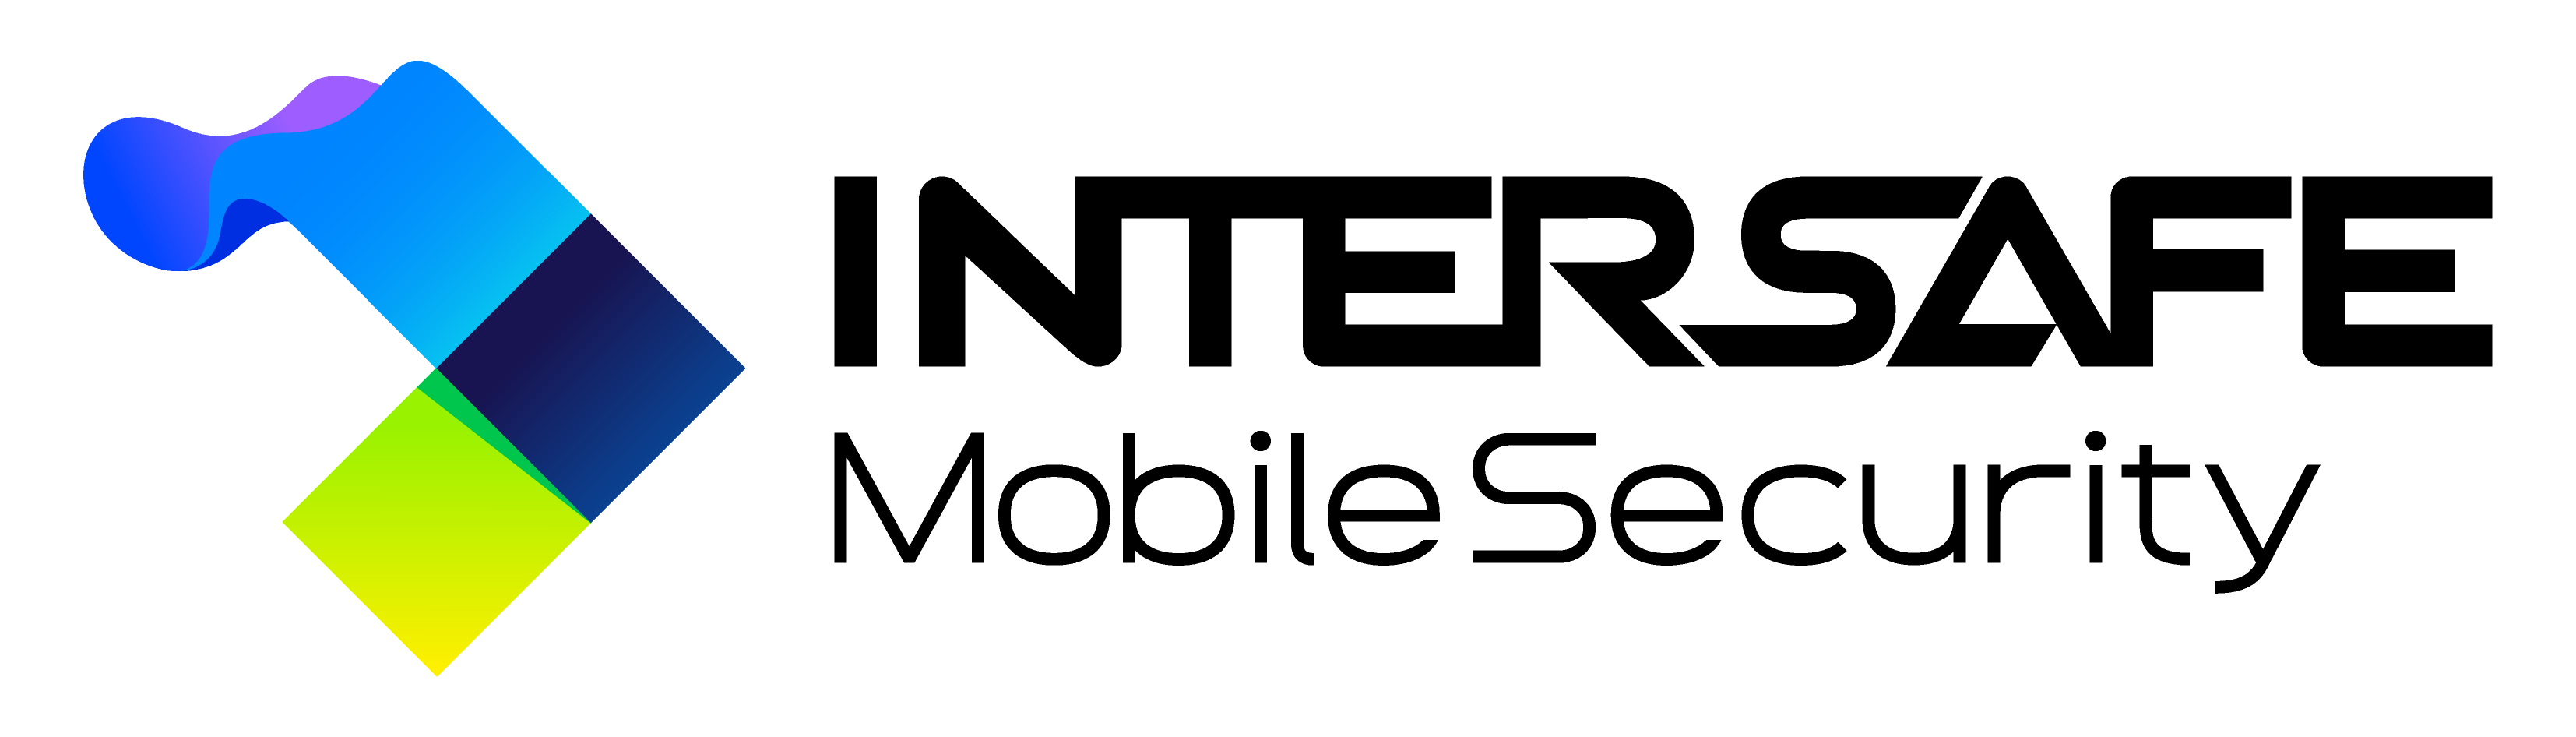 InterSafe Mobile Security